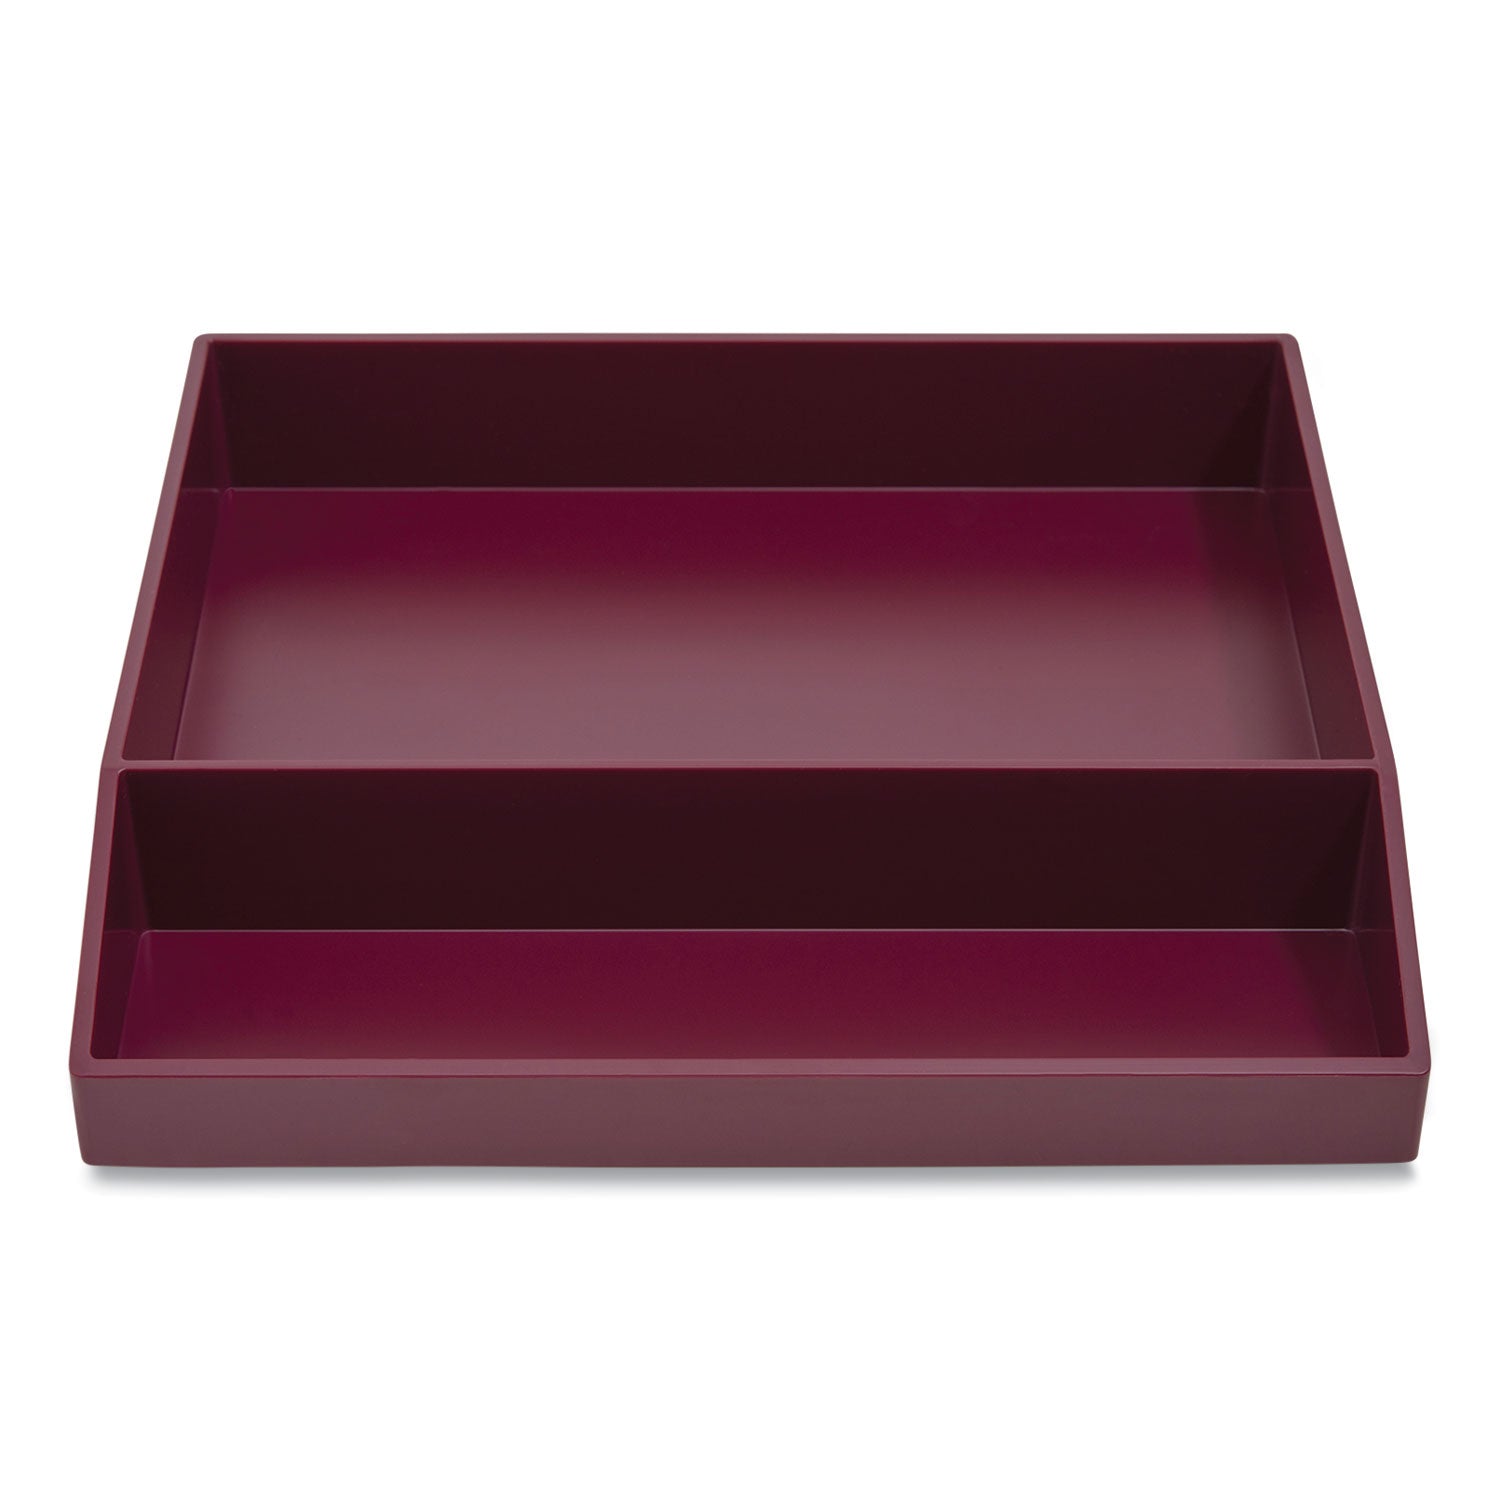 divided-stackable-plastic-tray-2-compartments-944-x-984-x-177-purple_tud24380380 - 1